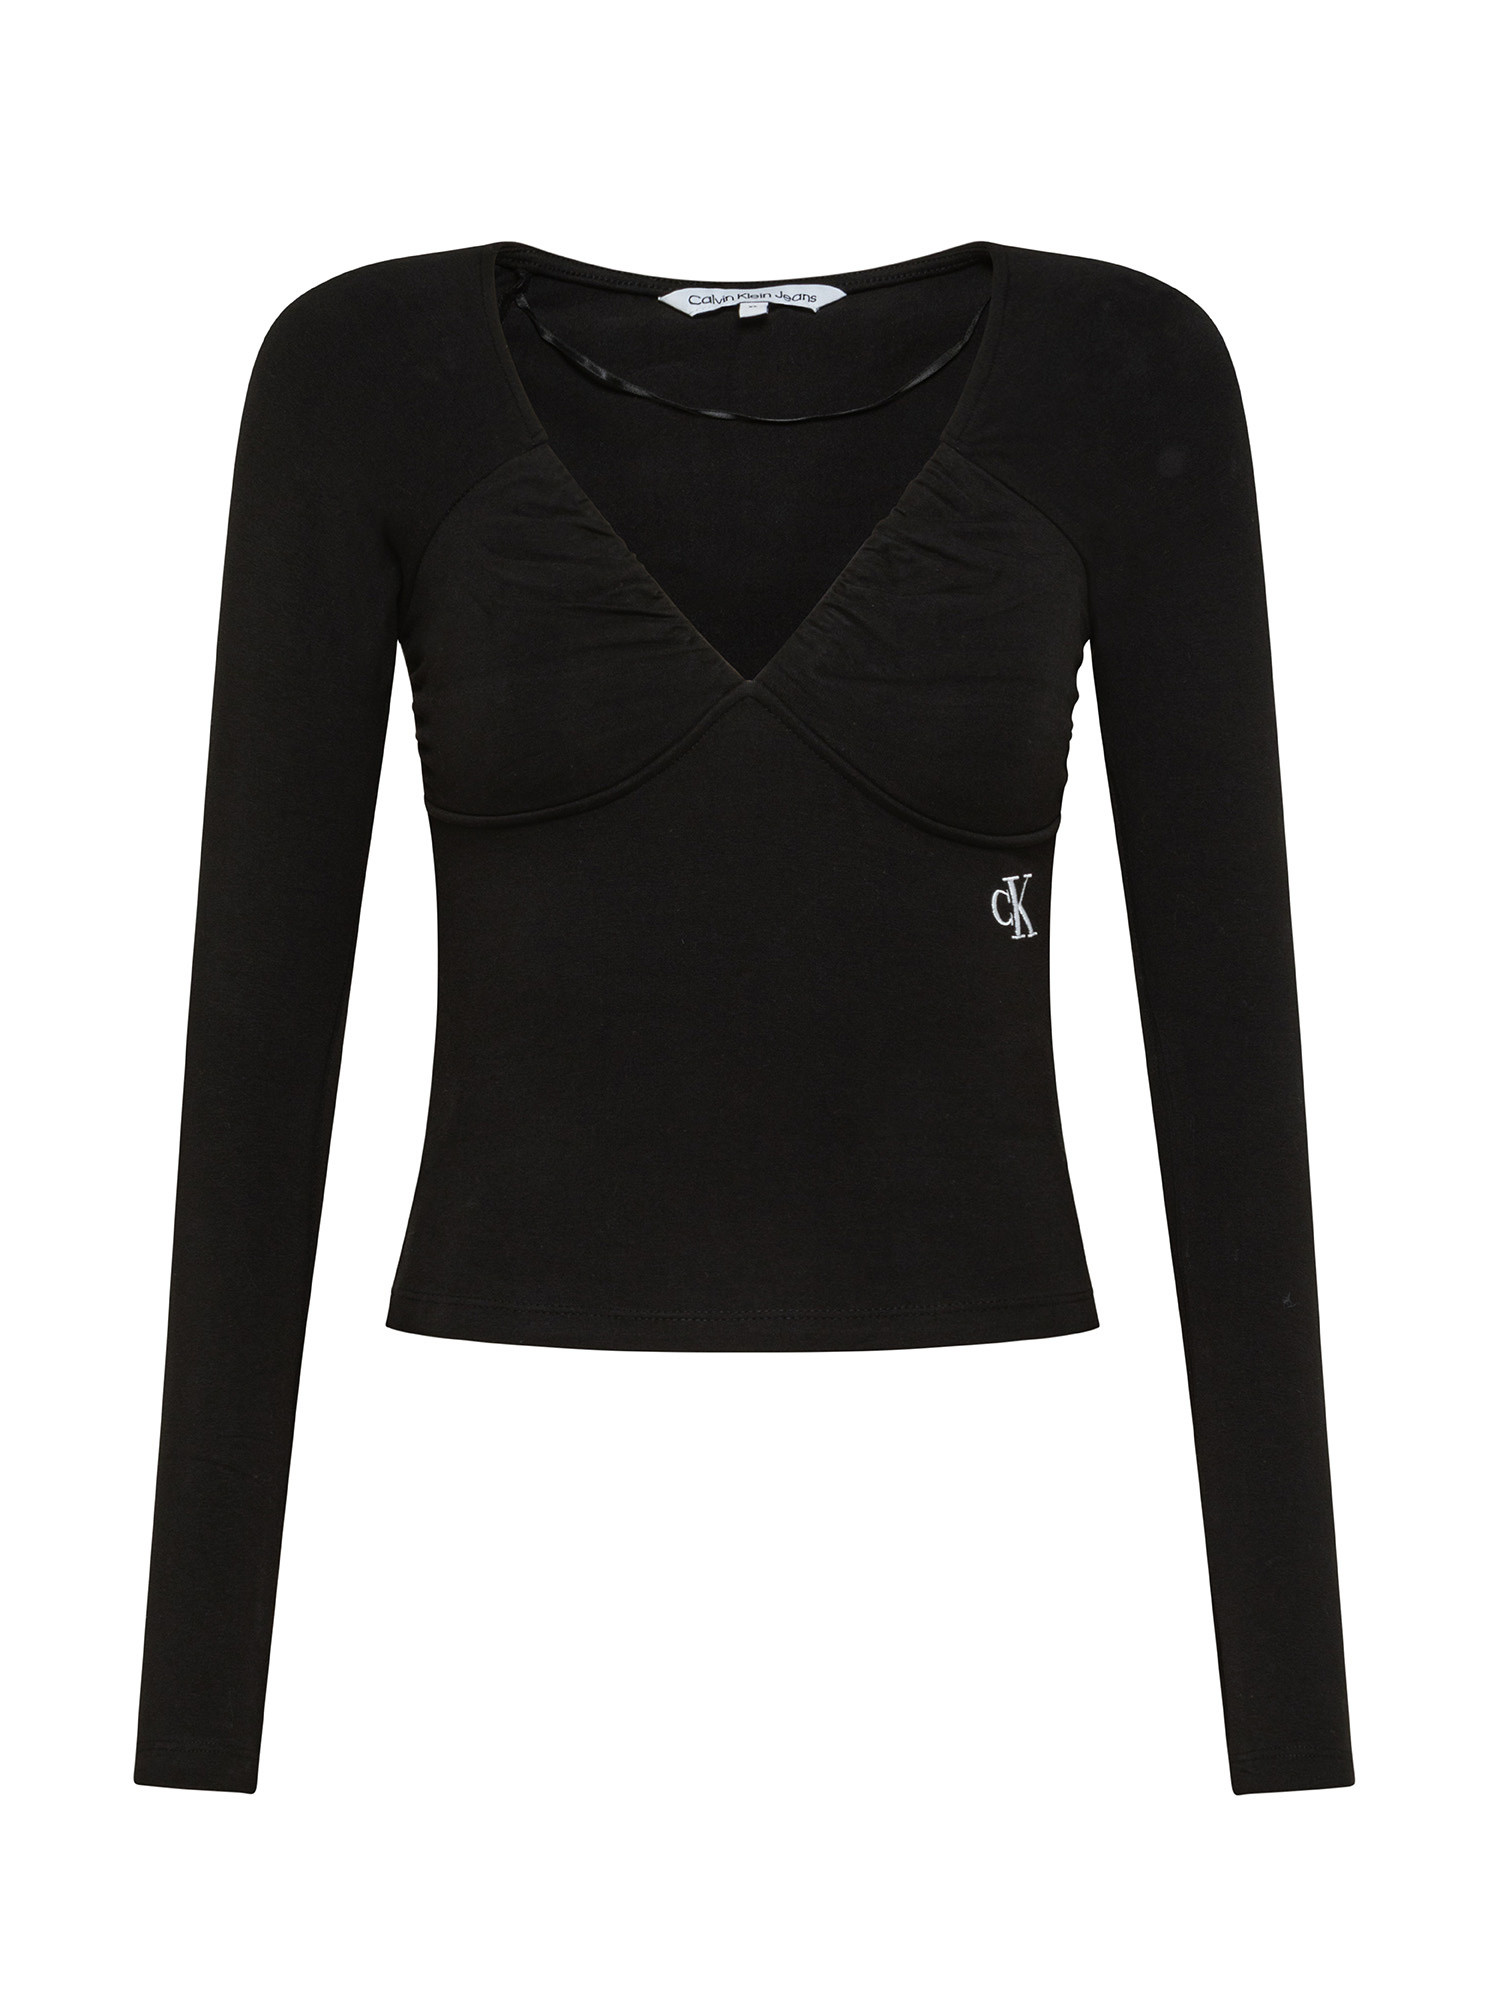 Knitted top with logo, Black, large image number 0